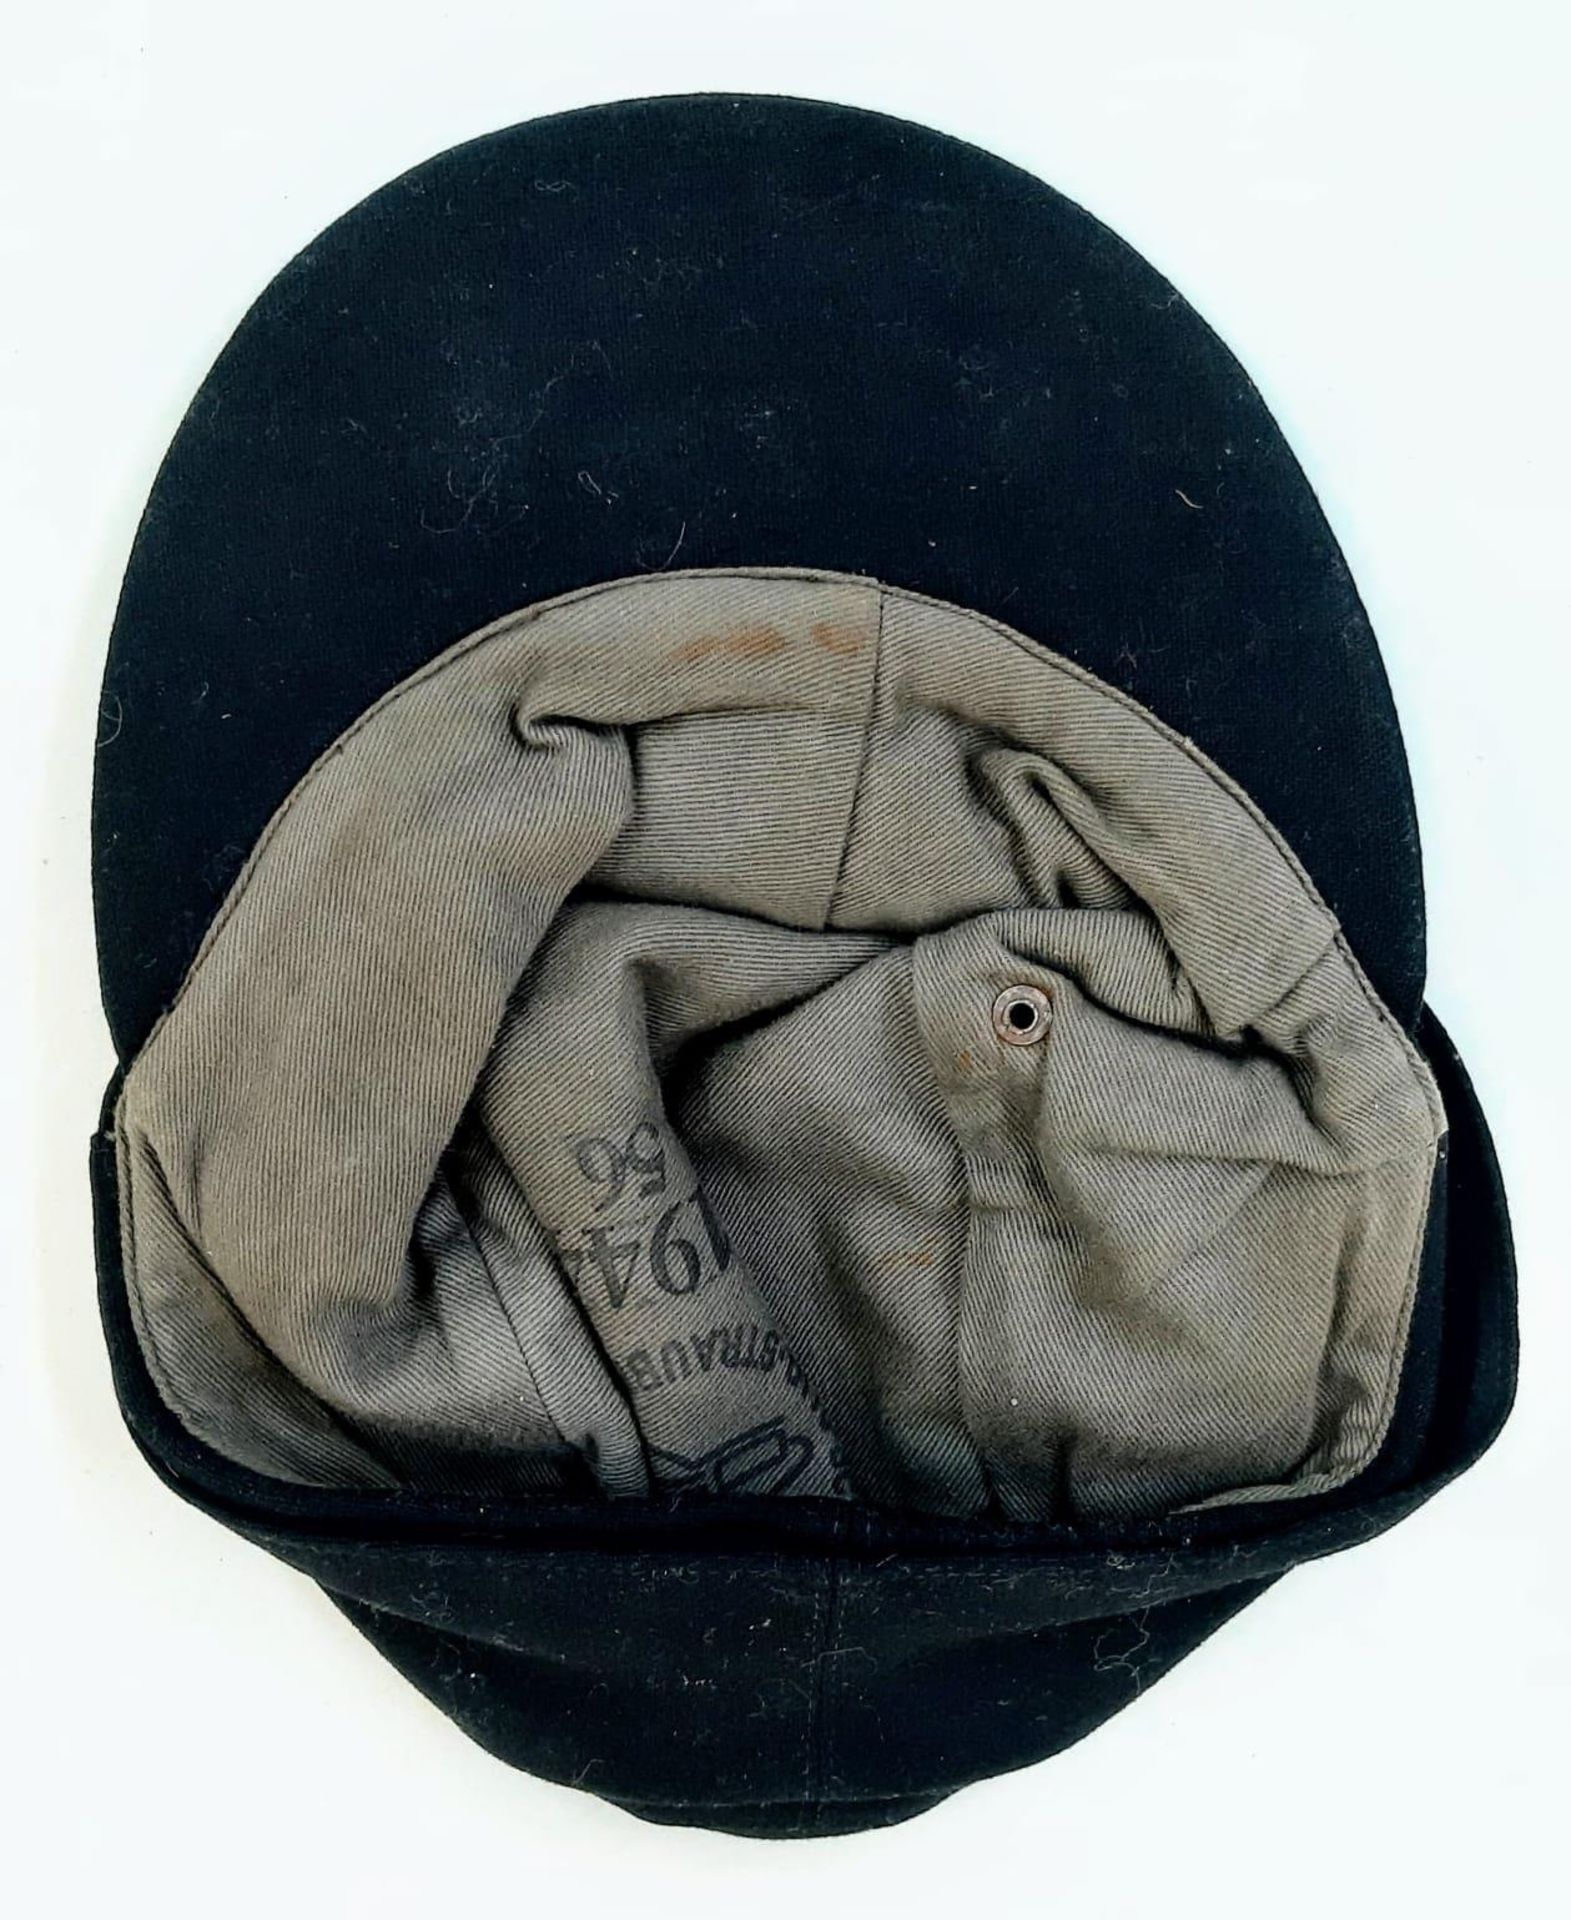 WW2 German Panzer Enlisted Mans/Nco’s M43 Cap. The insignia has been removed which means the soldier - Bild 5 aus 6